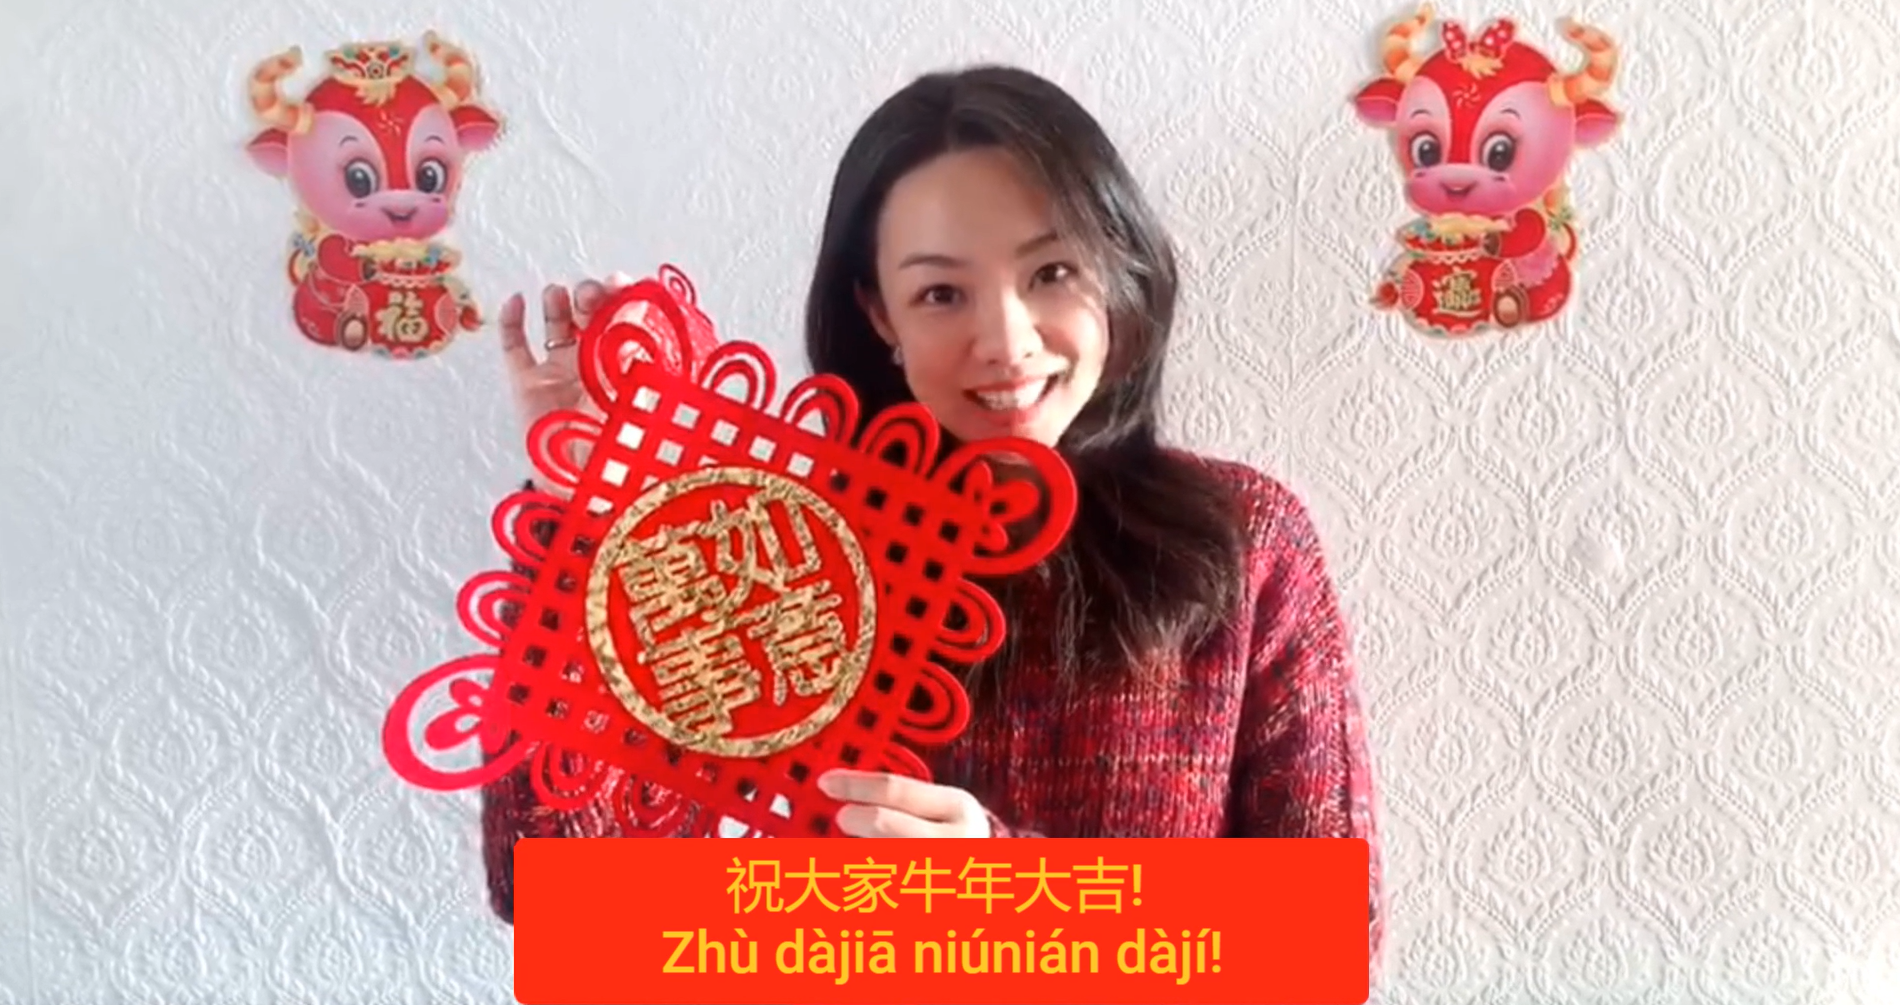 Chinese New Year greetings from the Business Confucius Institute team